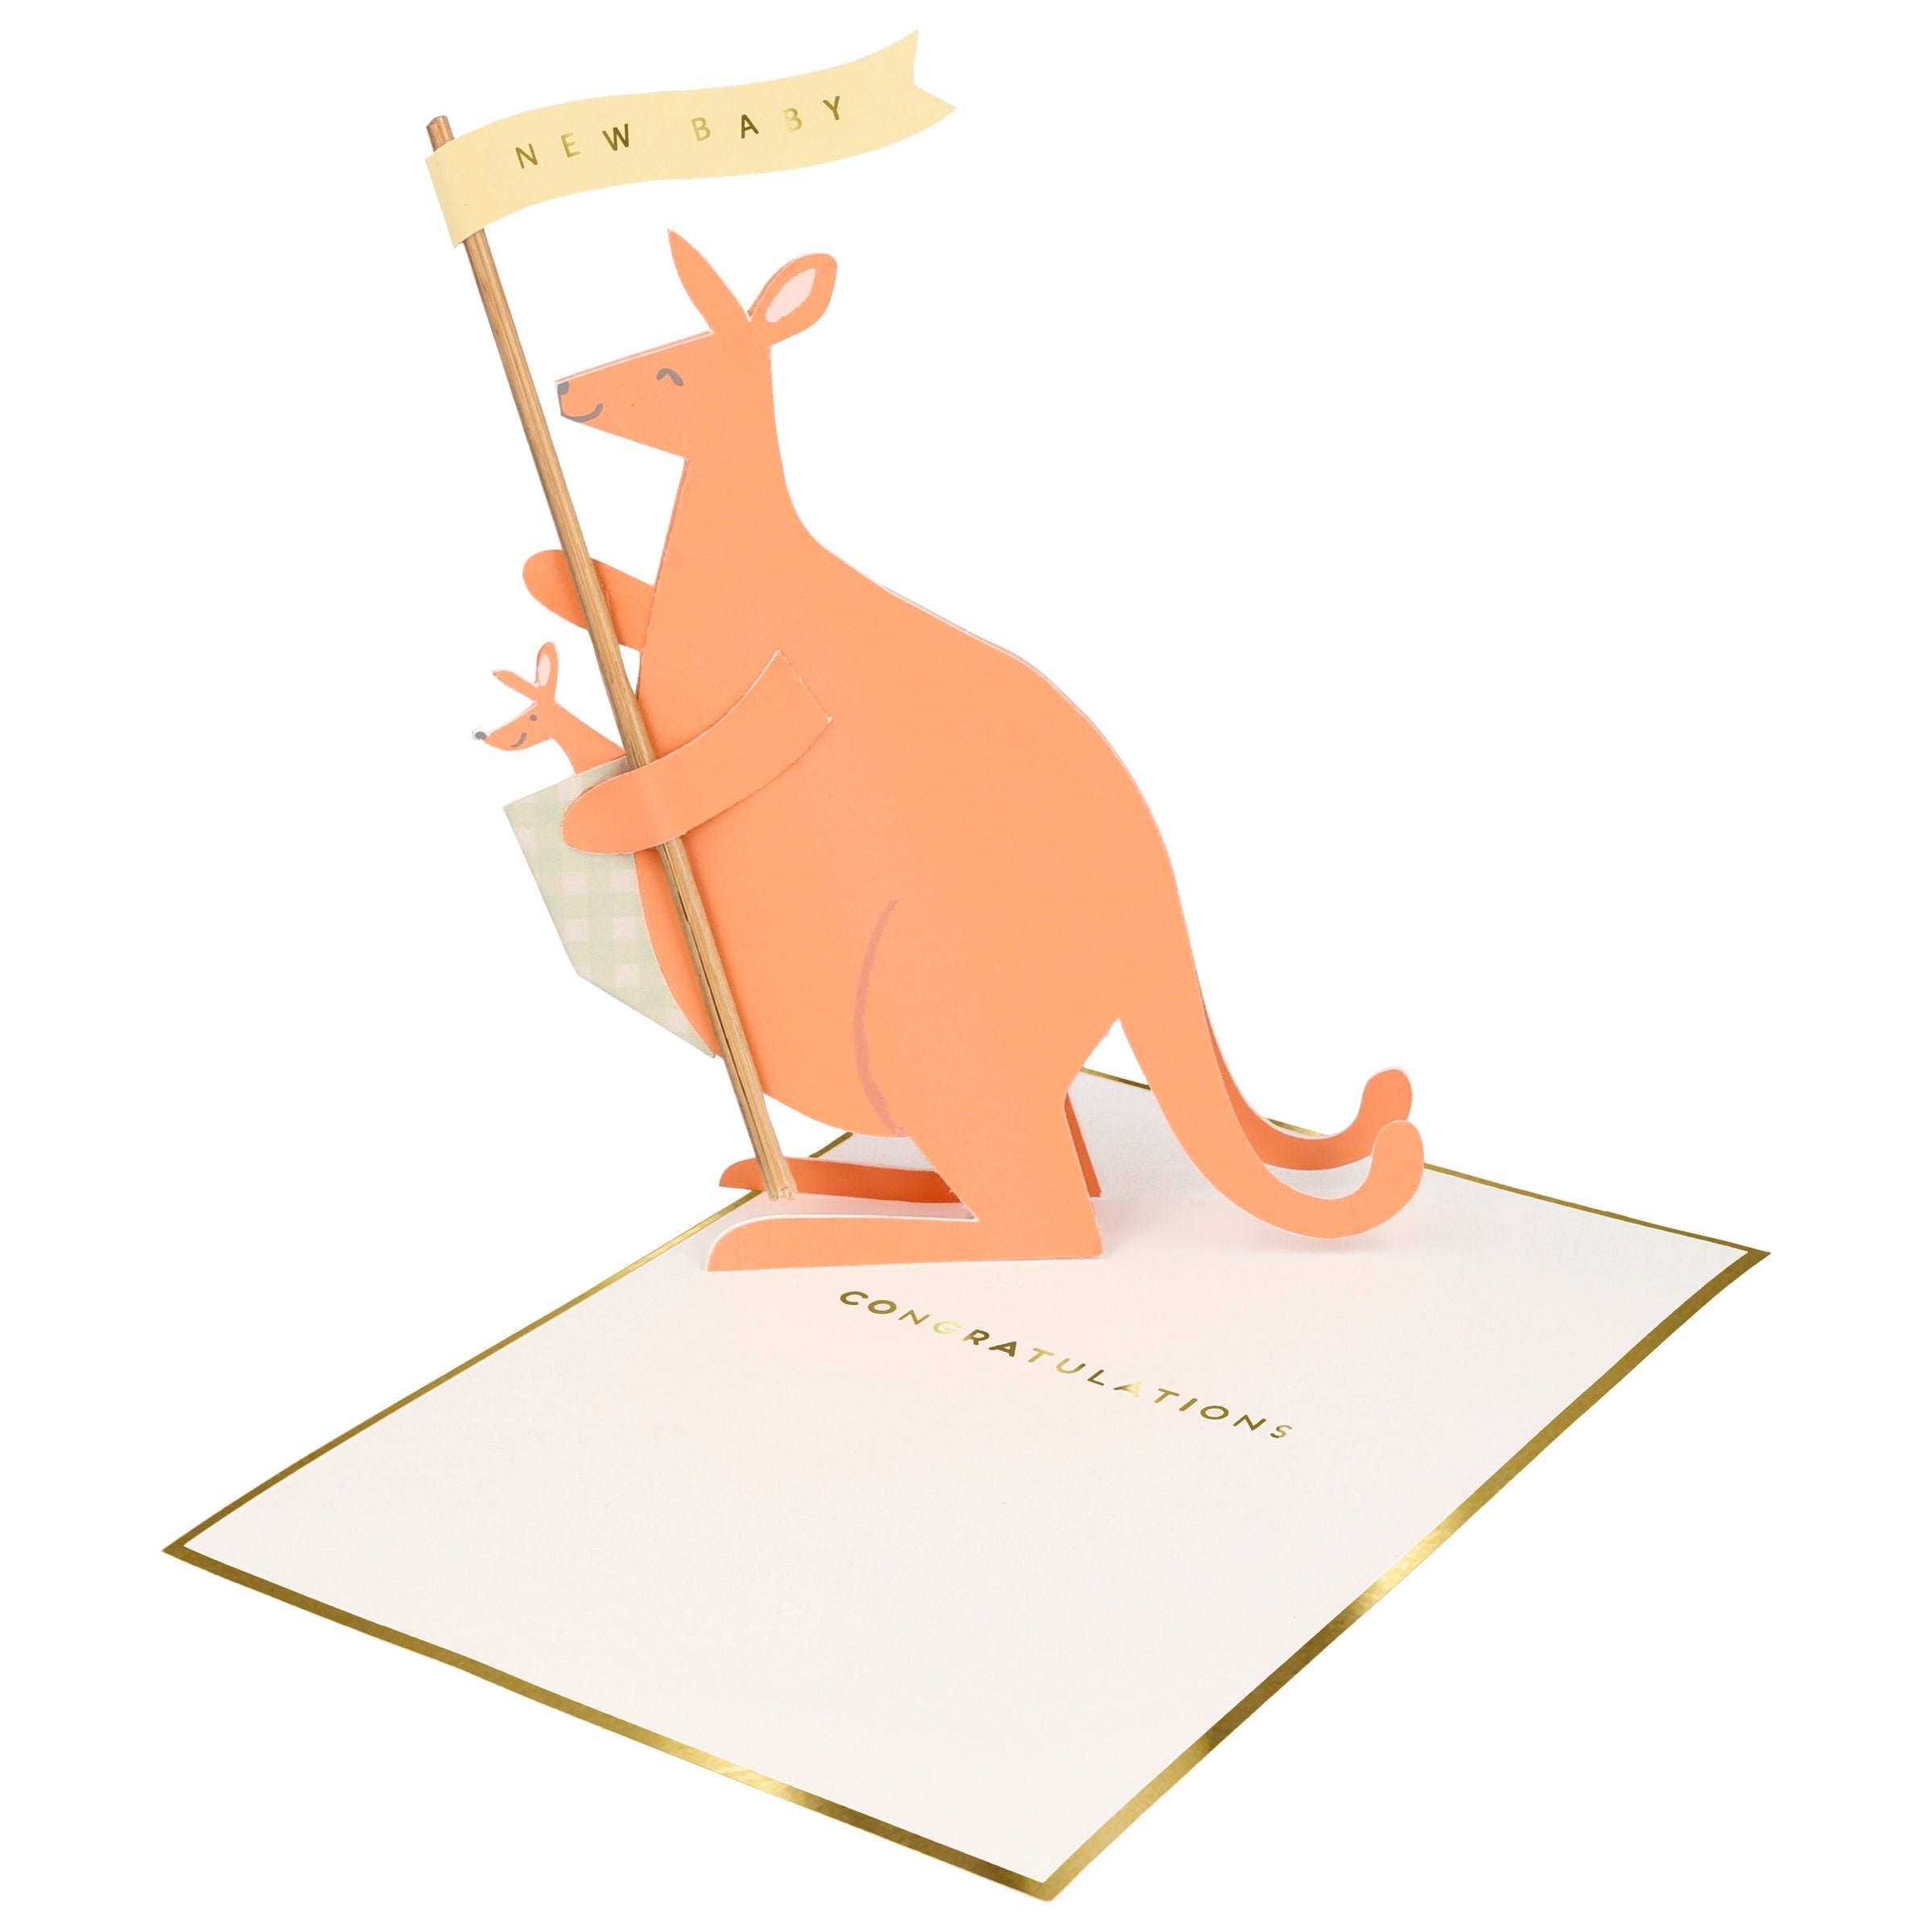 Our 3D card, with an adorable kangaroo, is perfect to send as a congratulations card for a new baby.